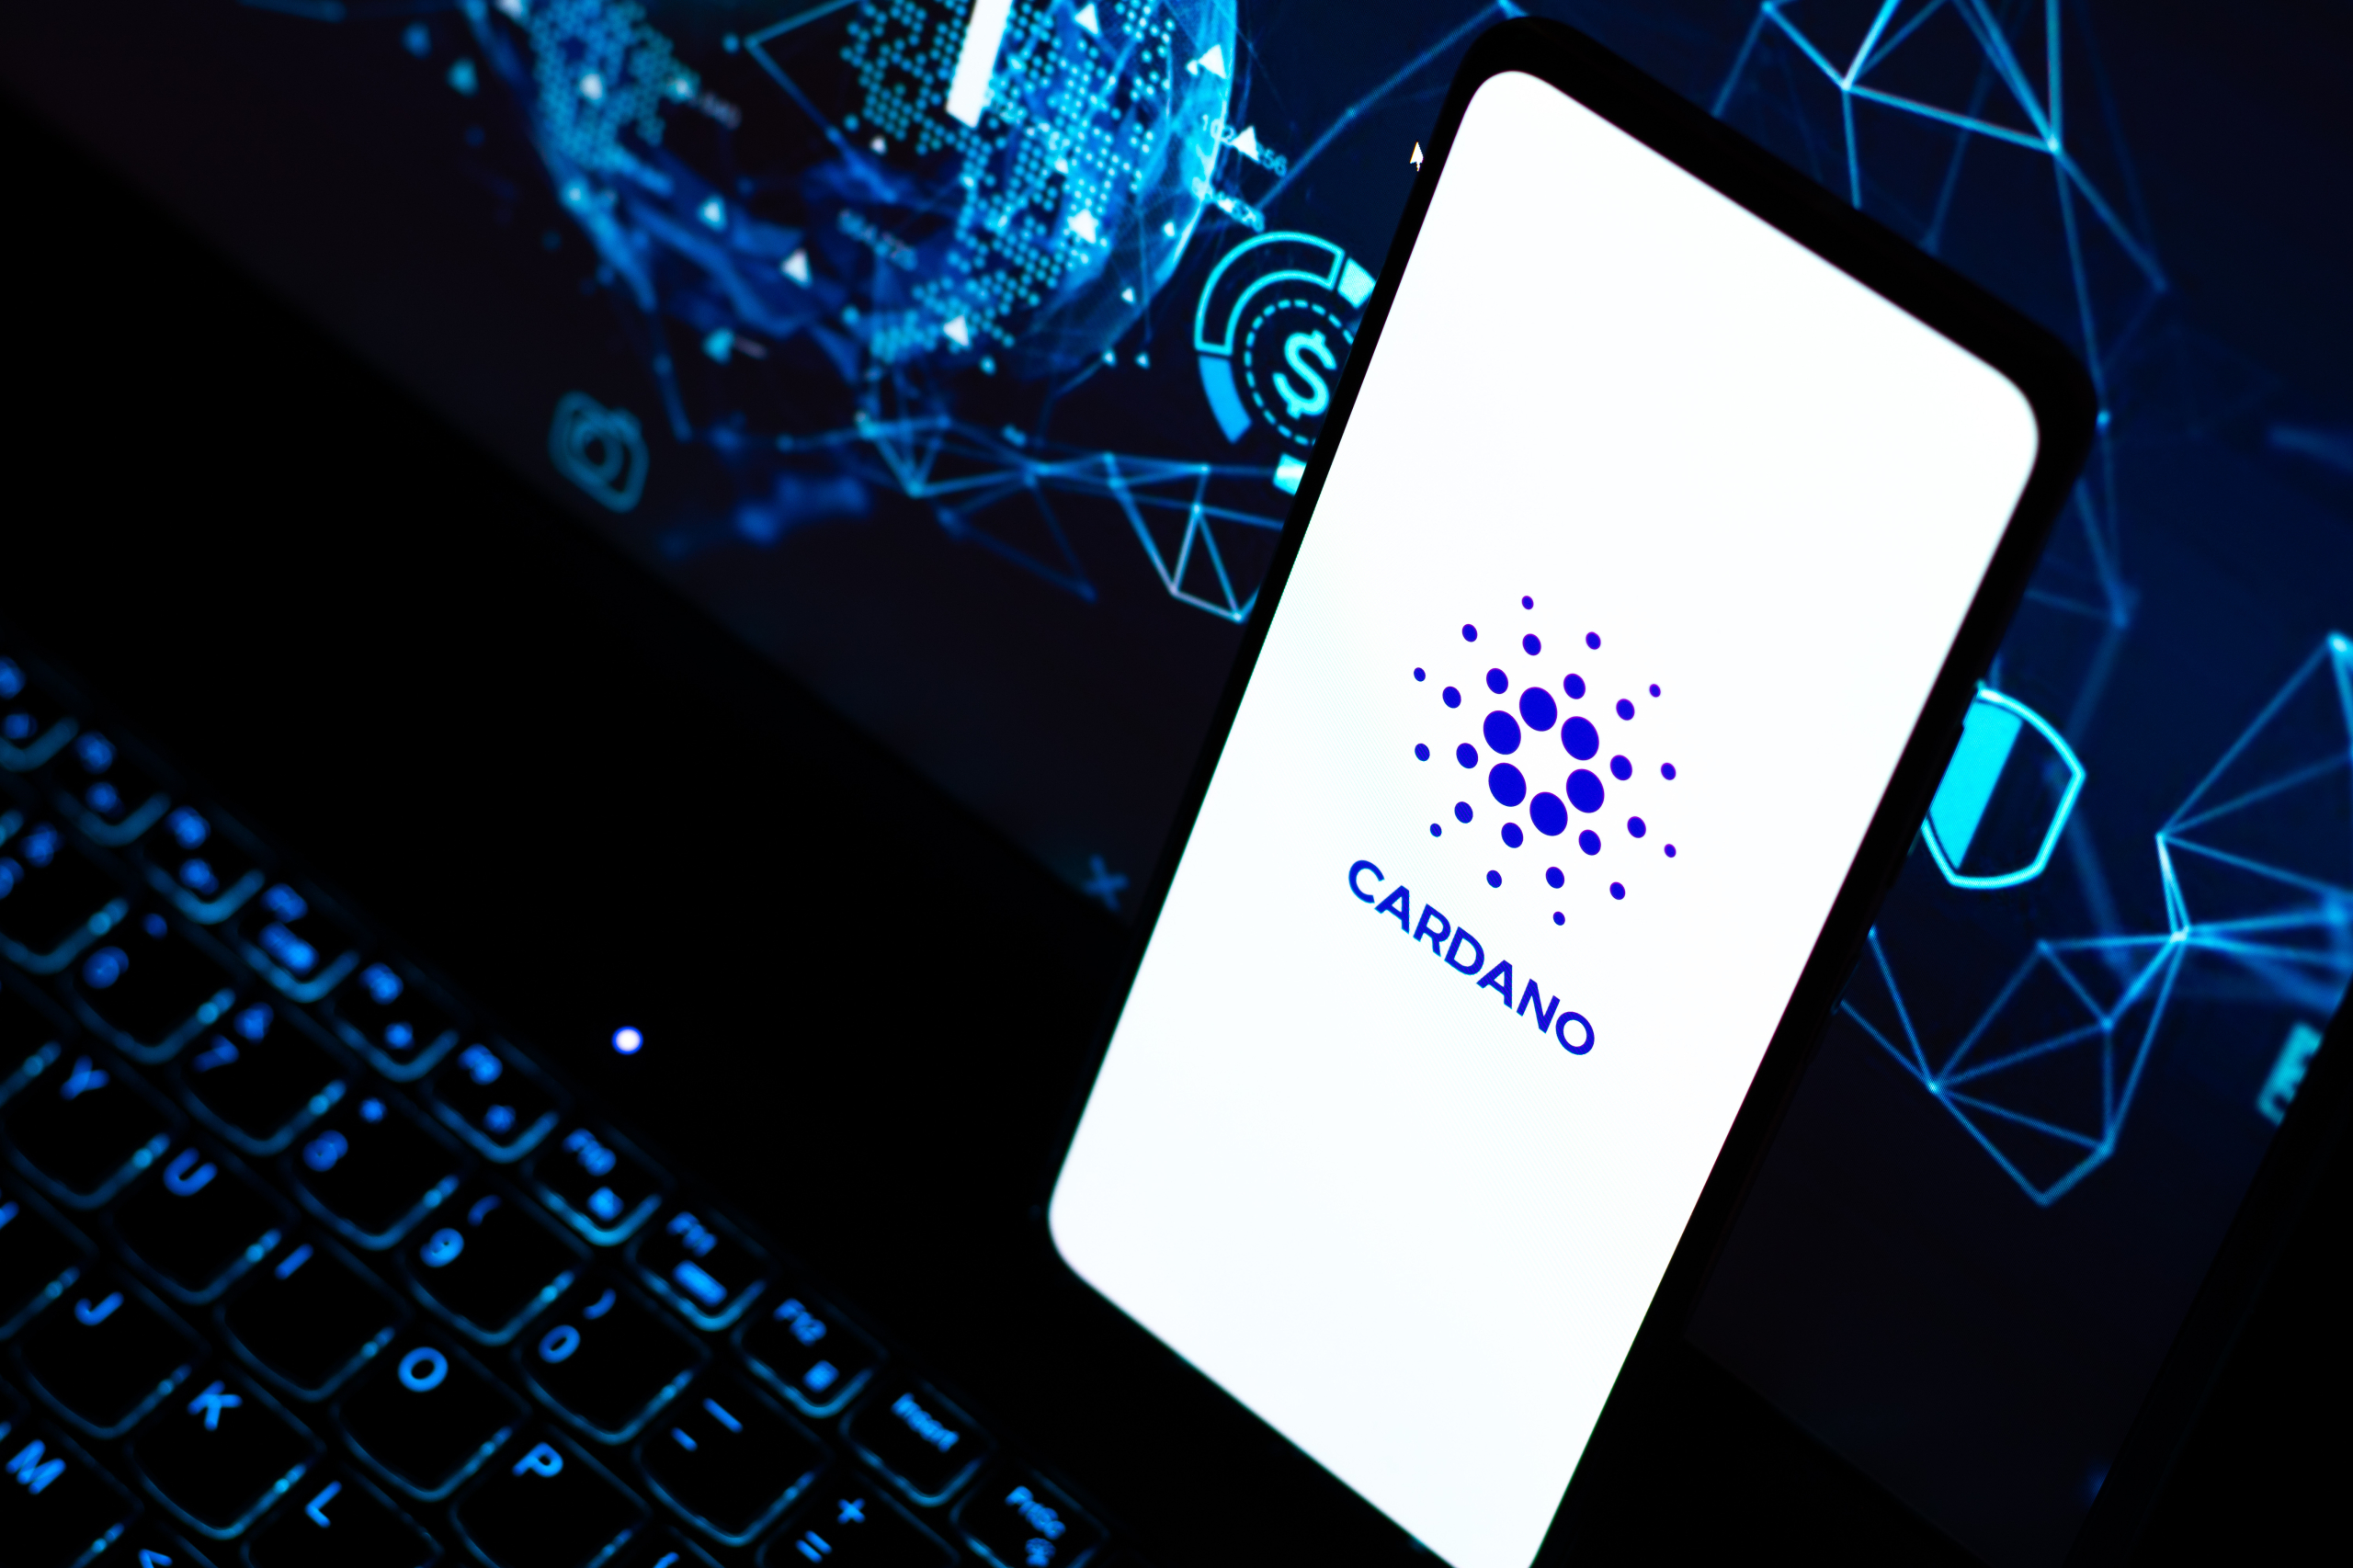 Deep Dive: The Dynamic Growth of Cardano
